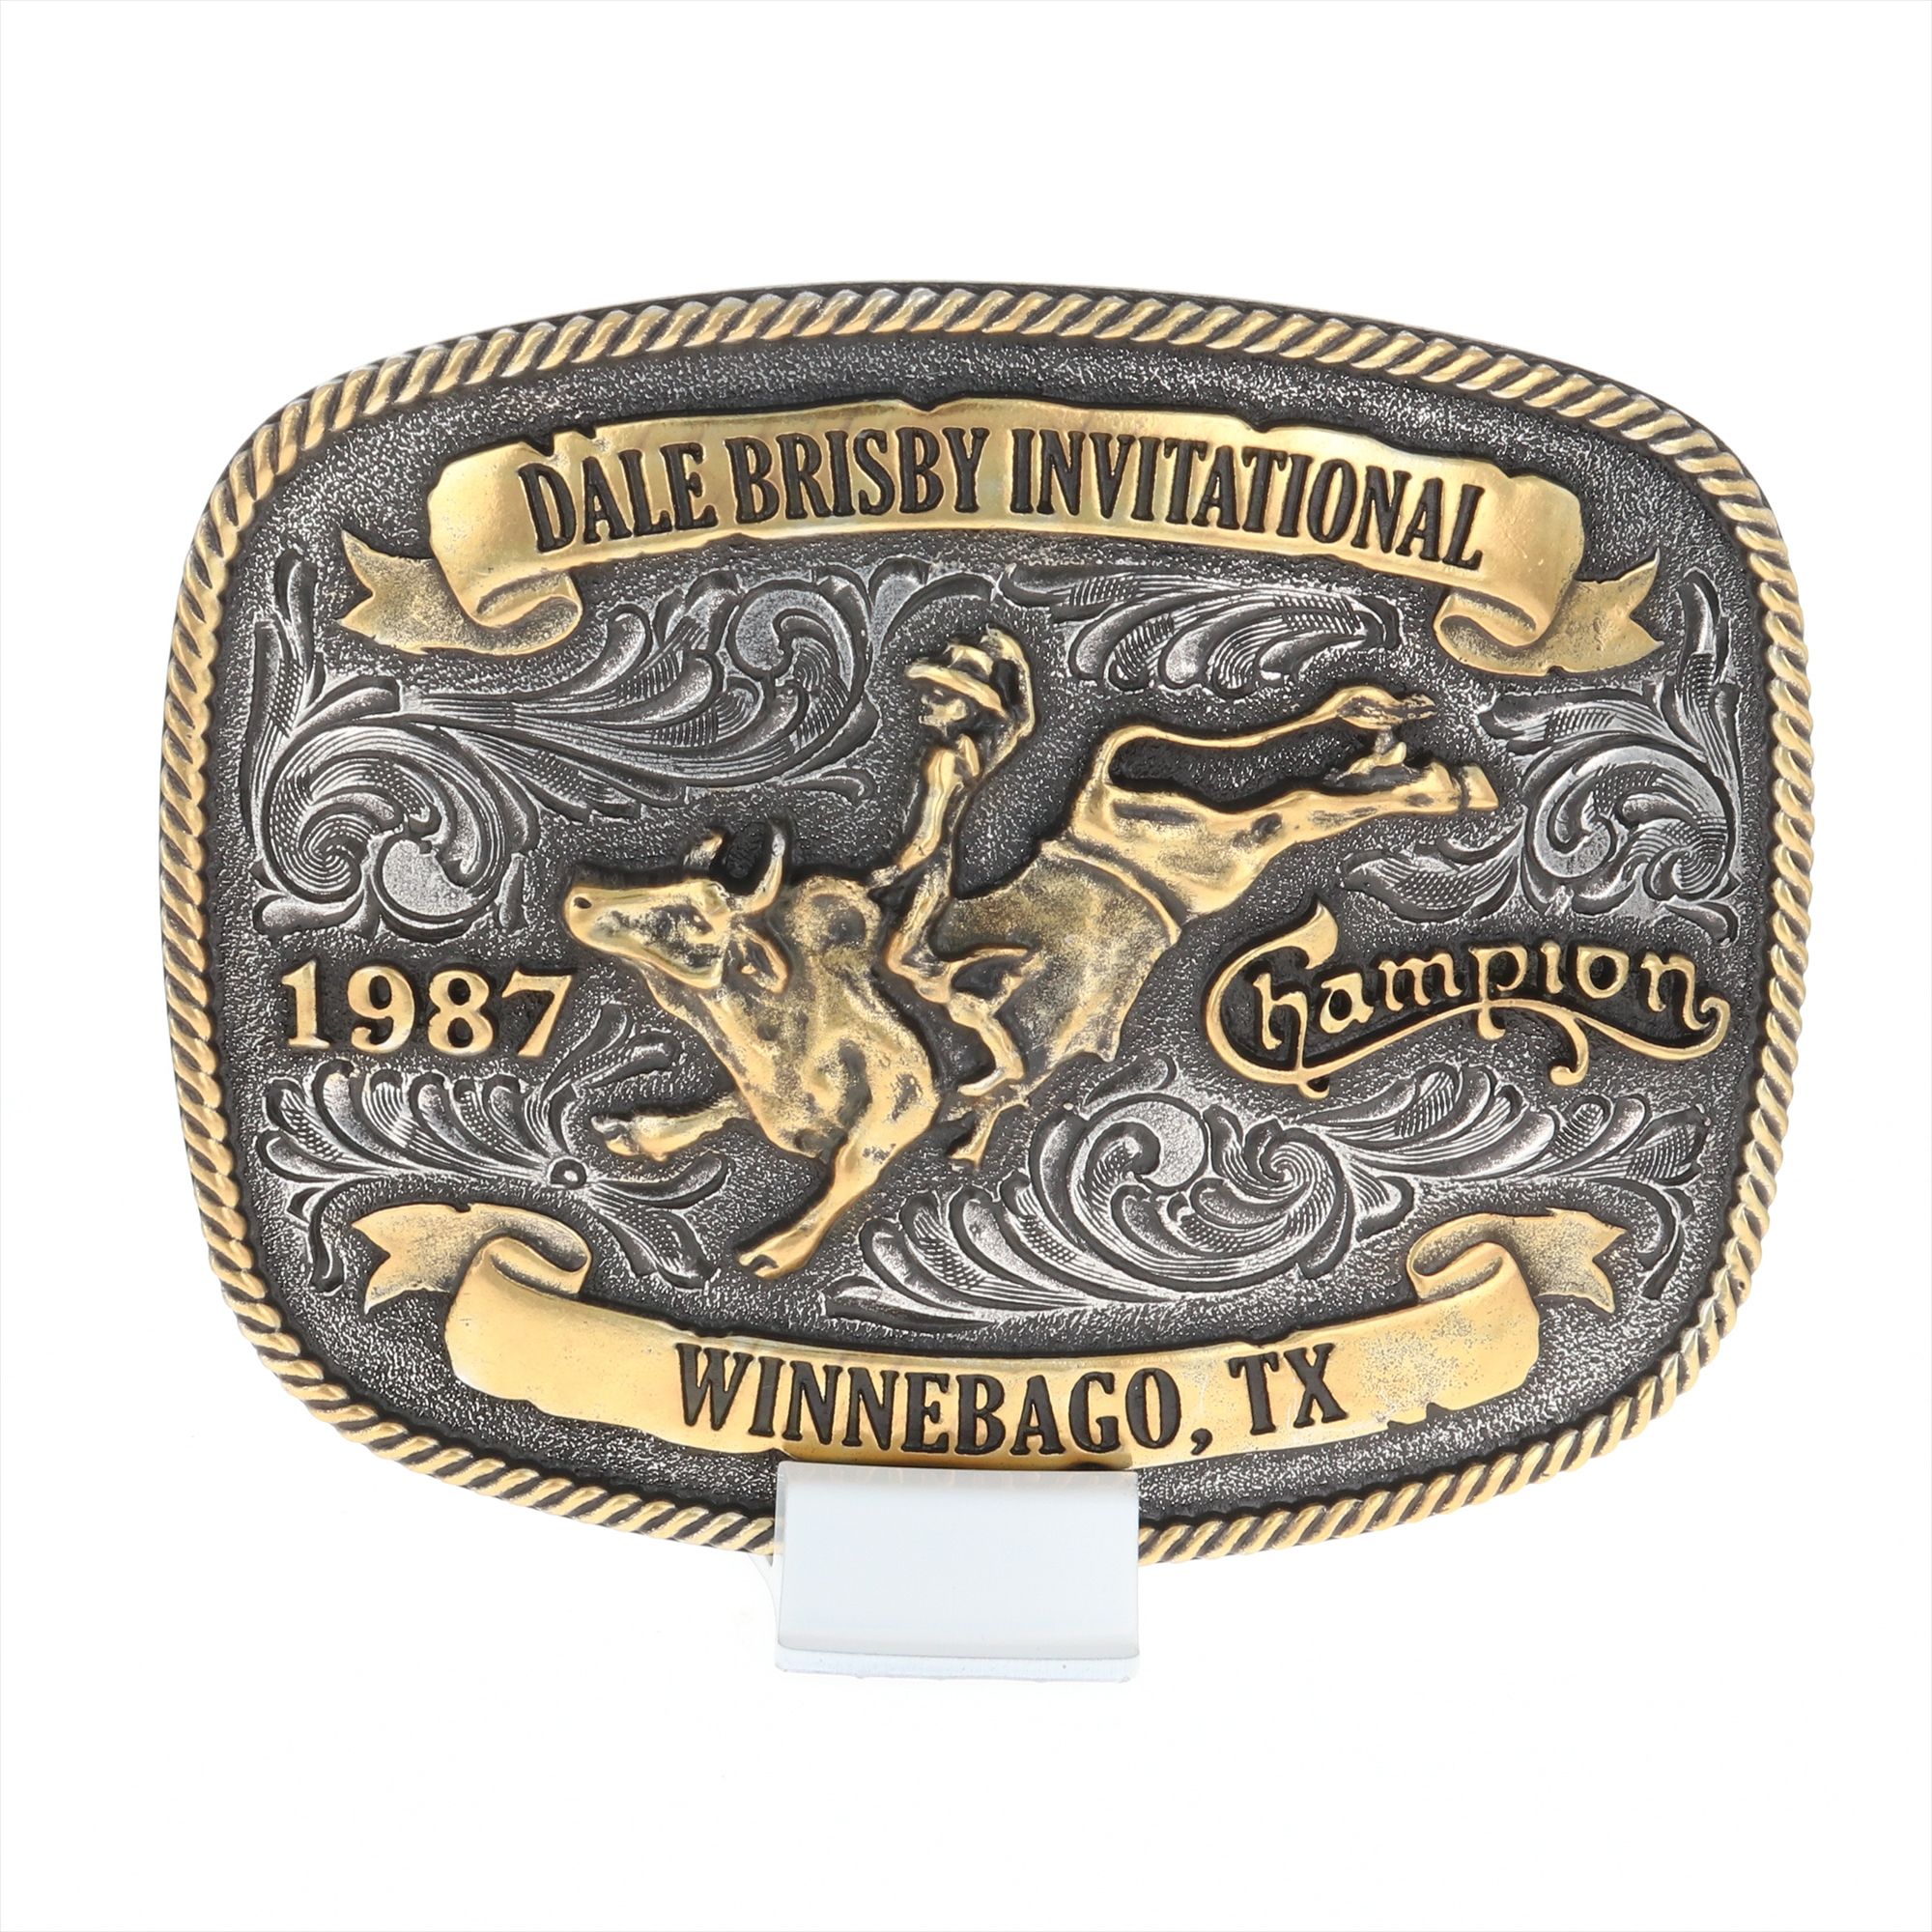 Dale Brisby Invitational 1987 Trophy Buckle